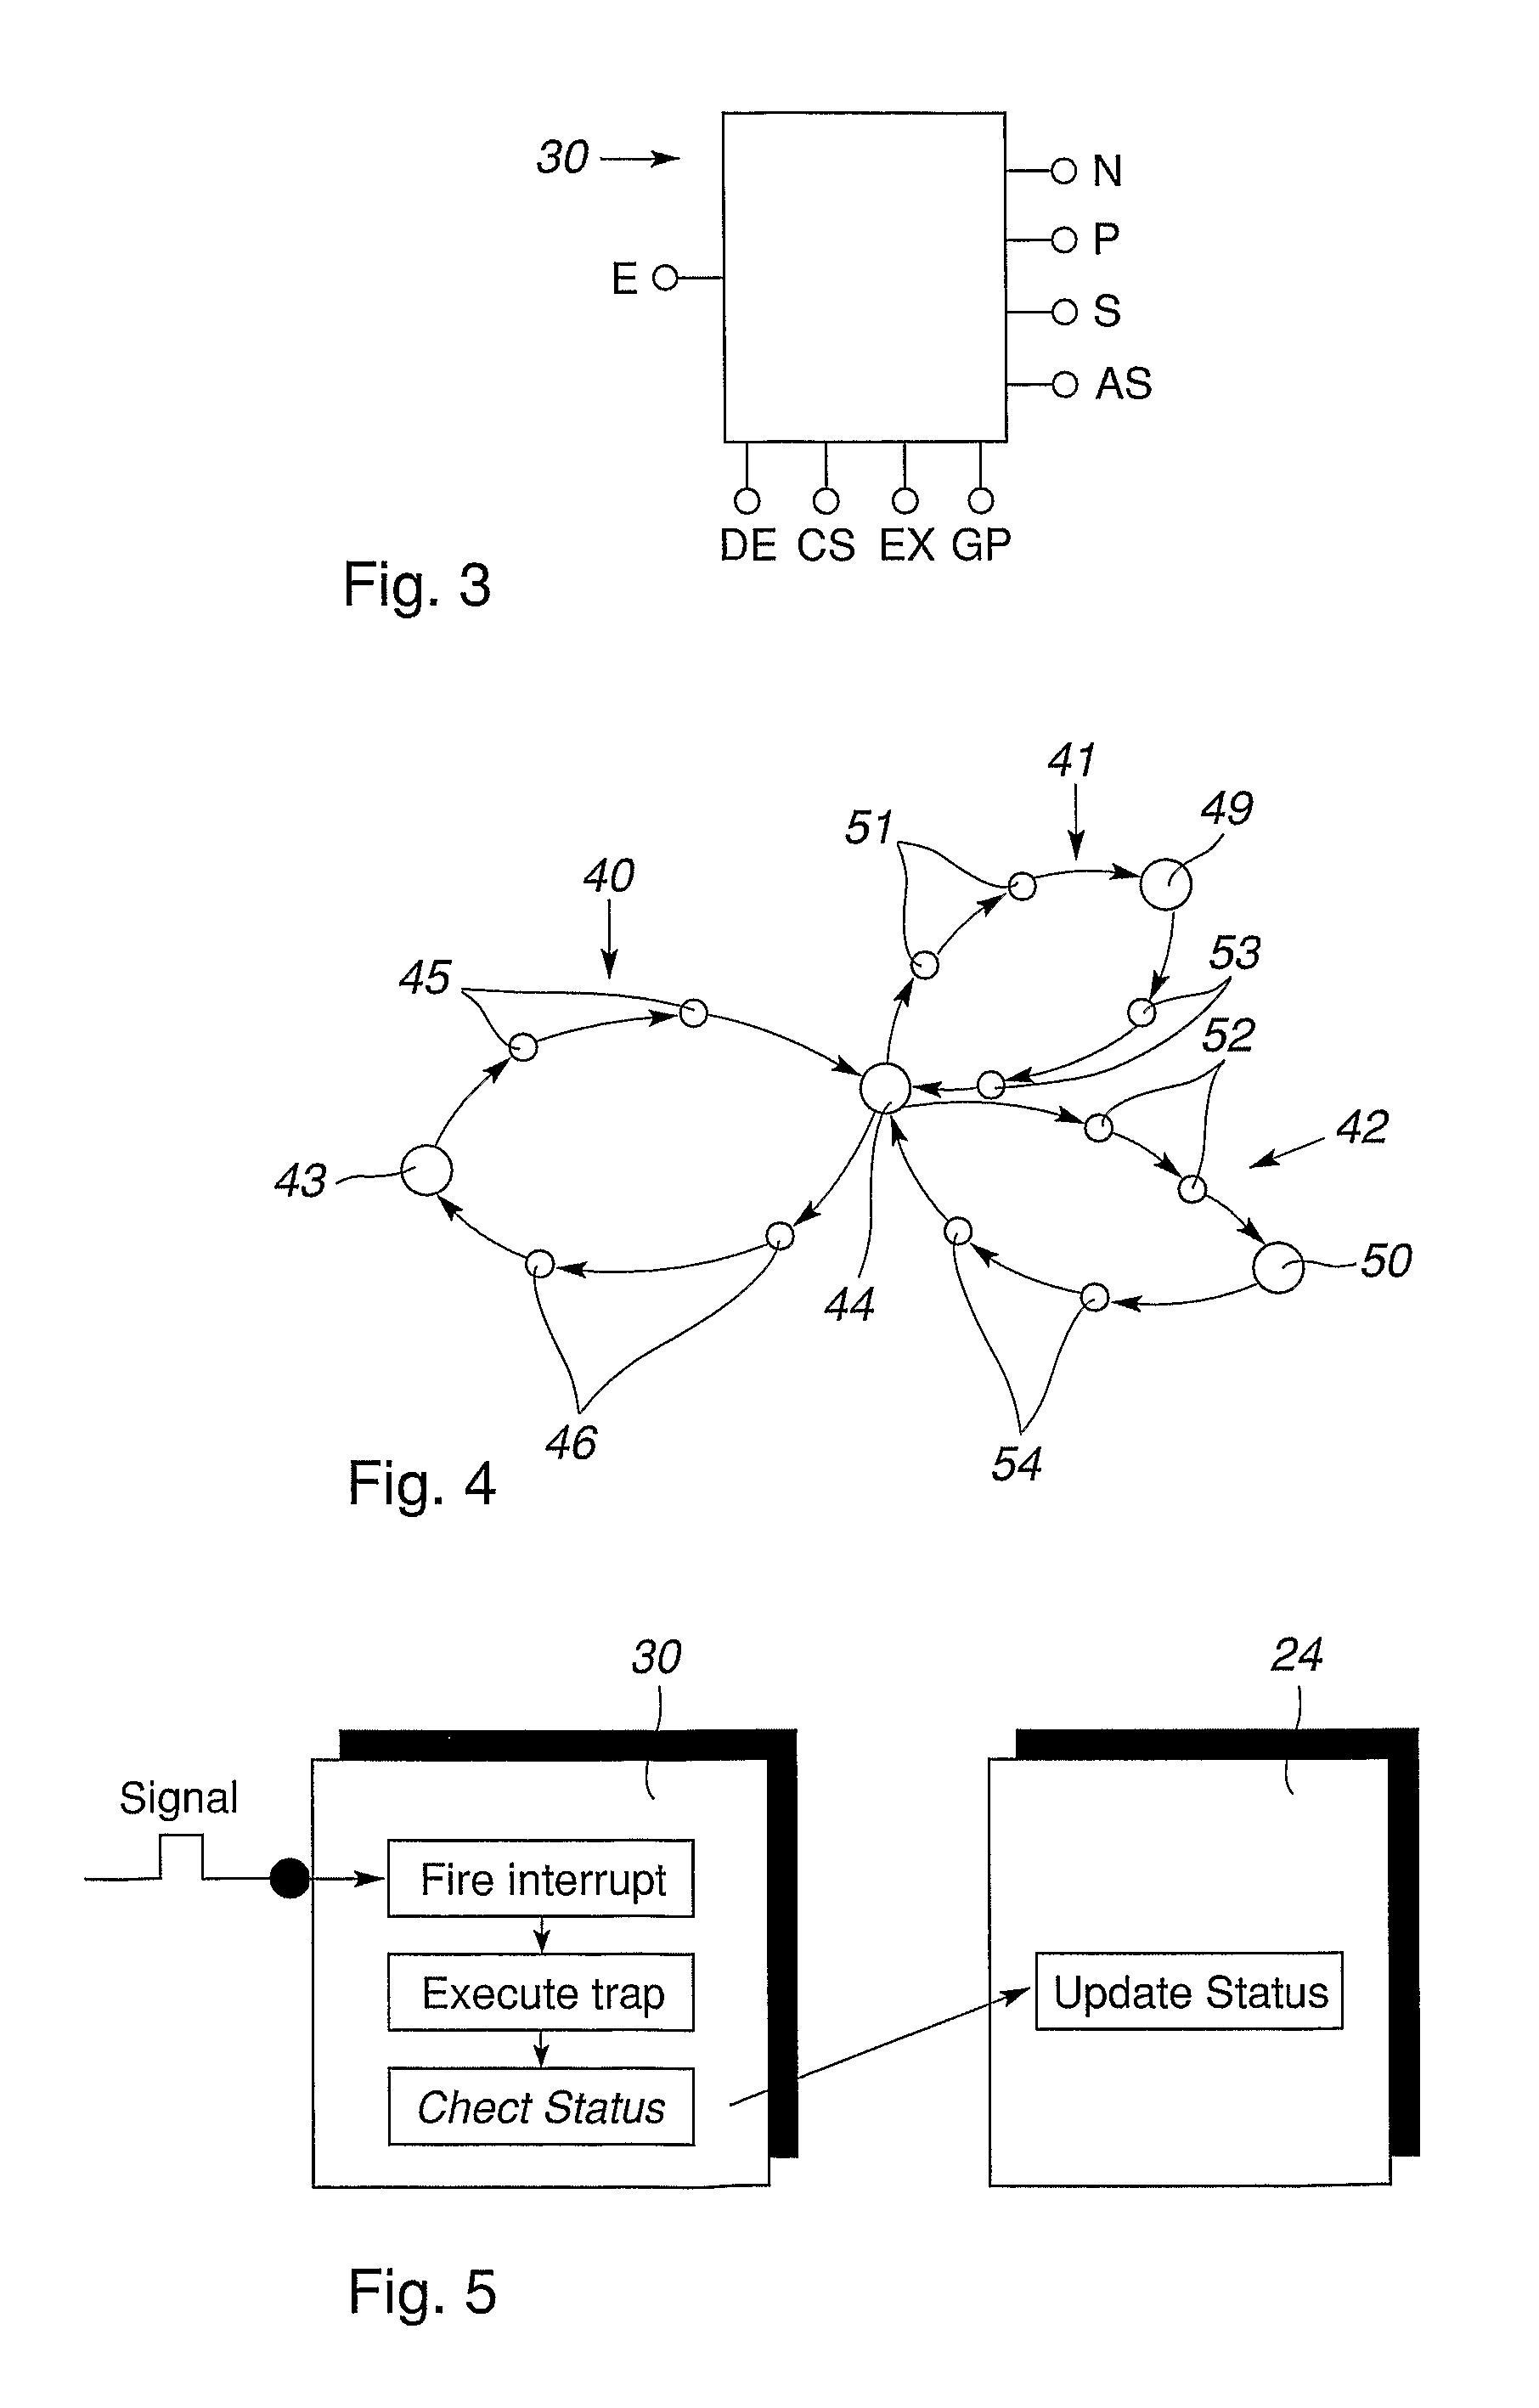 System and a method for controlling movements of an industrial robot